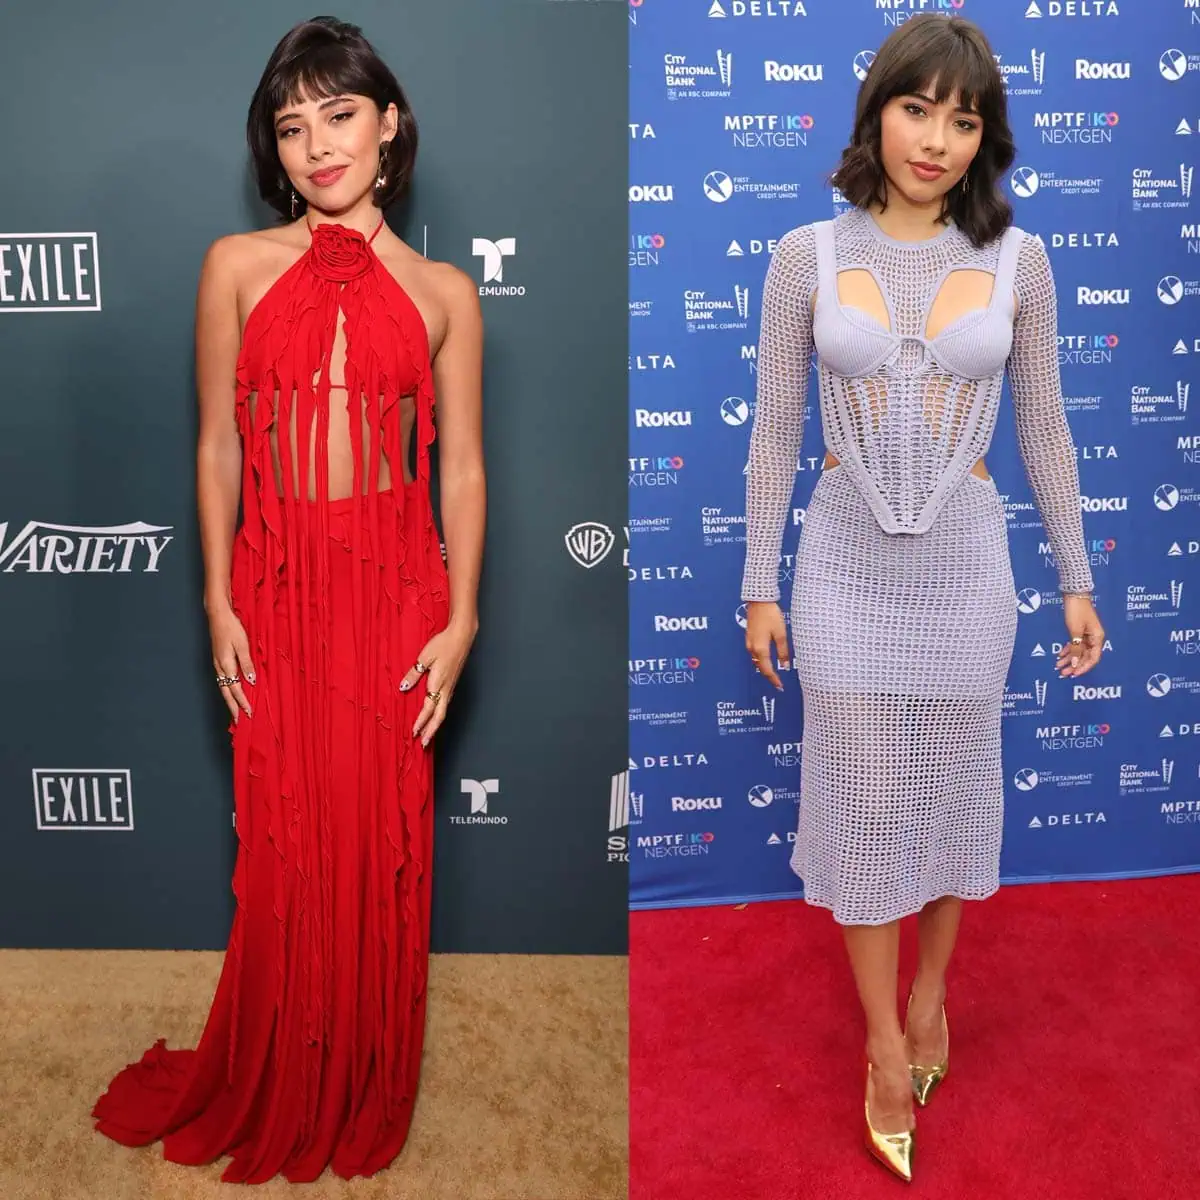 Xochitl Gomez wraps up June with summery ensembles: a red-hot ruffle fringe bra top and skirt and a periwinkle fishnet dress